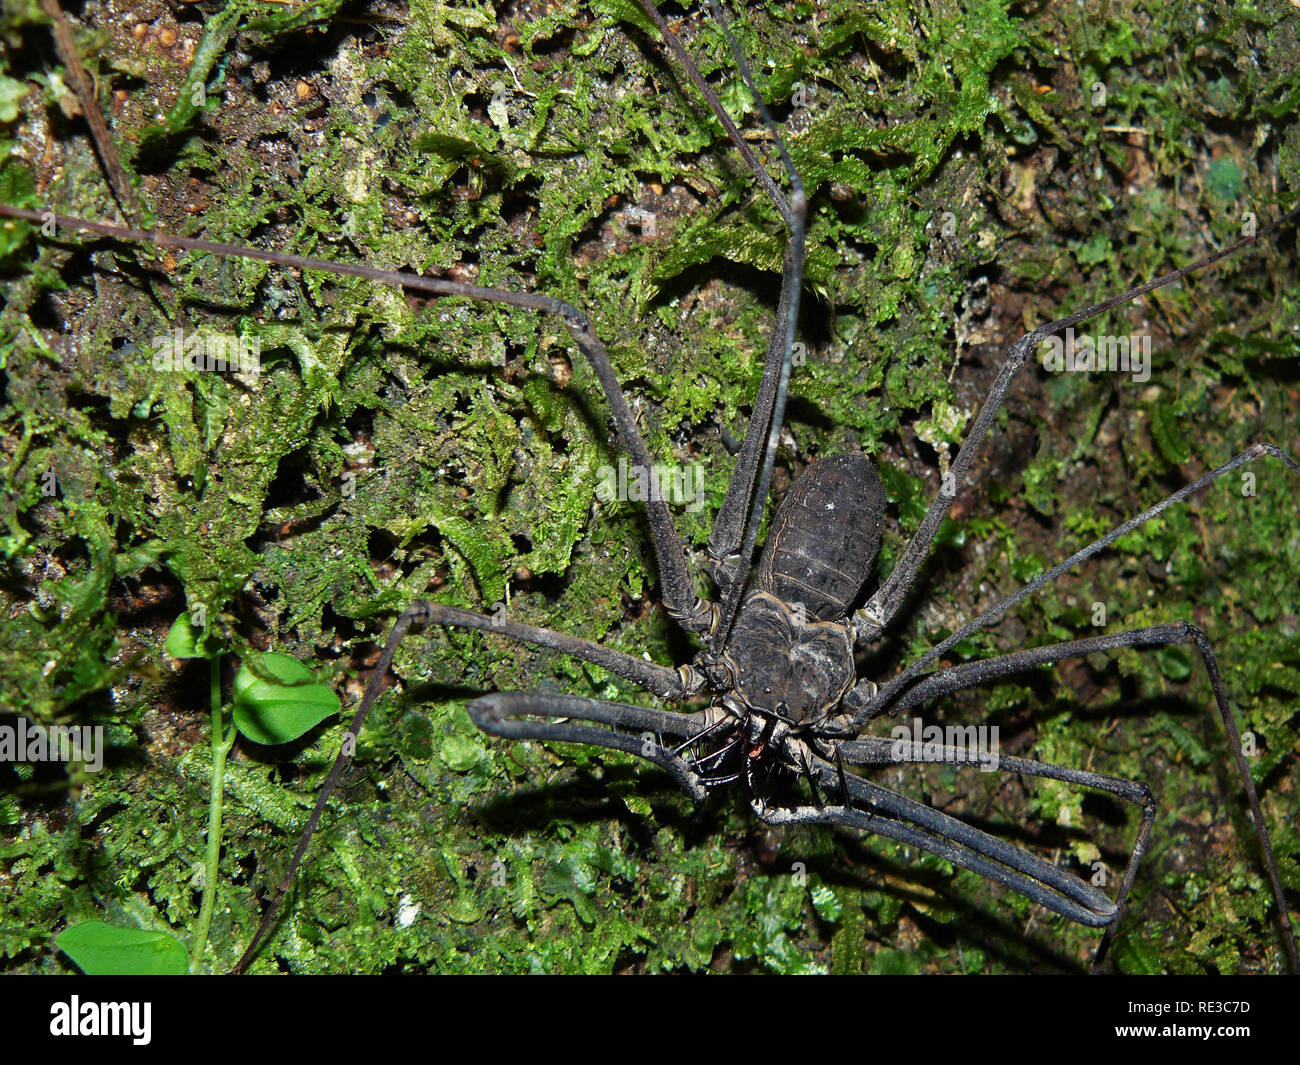 A large scorpion spider on a tree in the Amazone of Ecuador Stock Photo